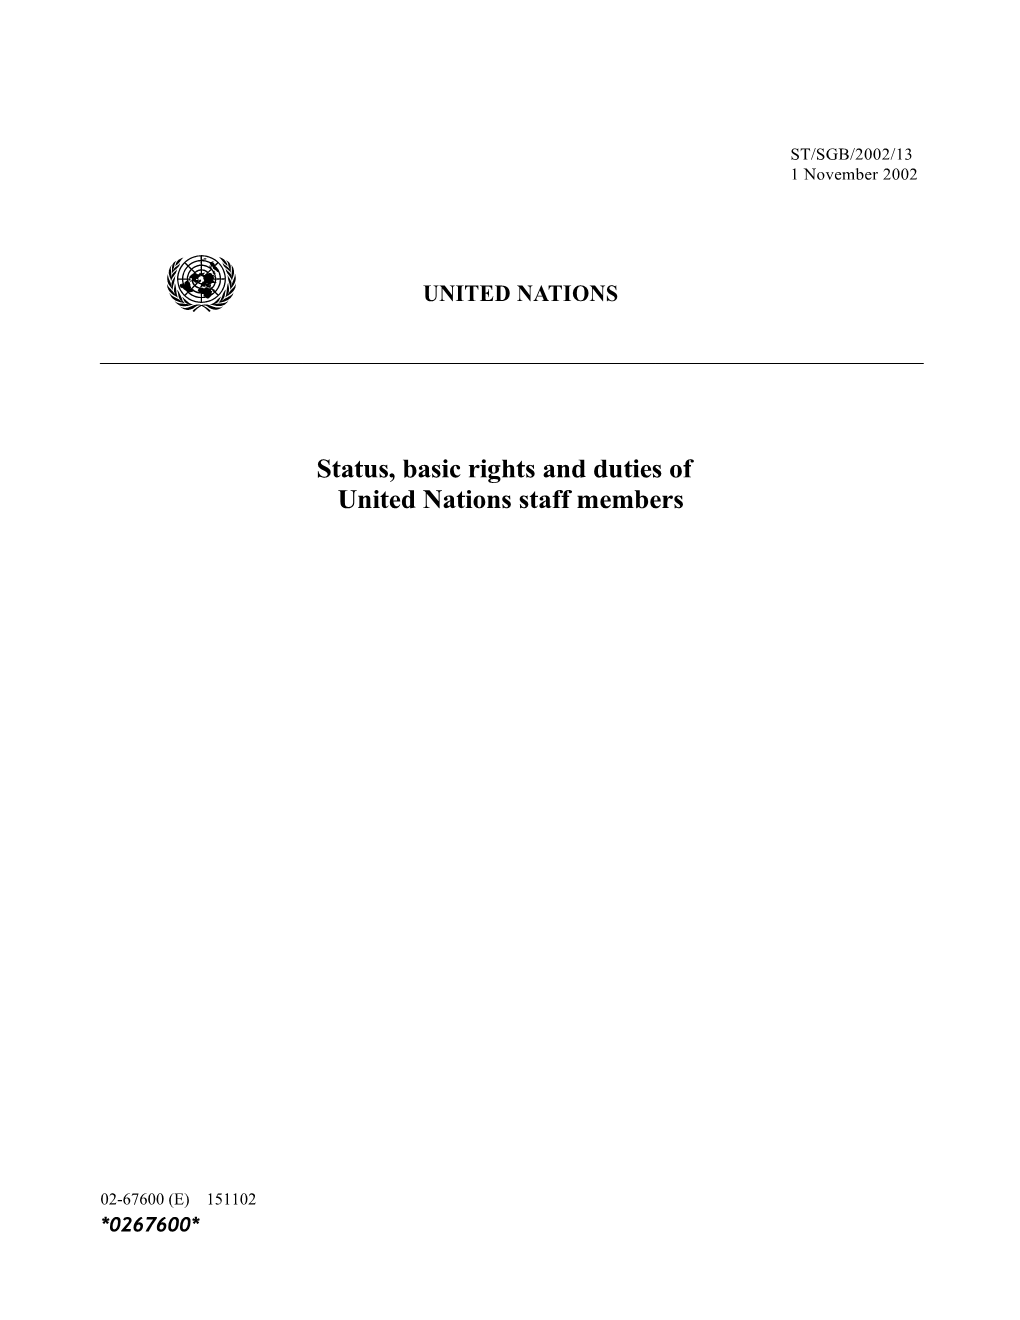 Status, Basic Rights and Duties of United Nations Staff Members